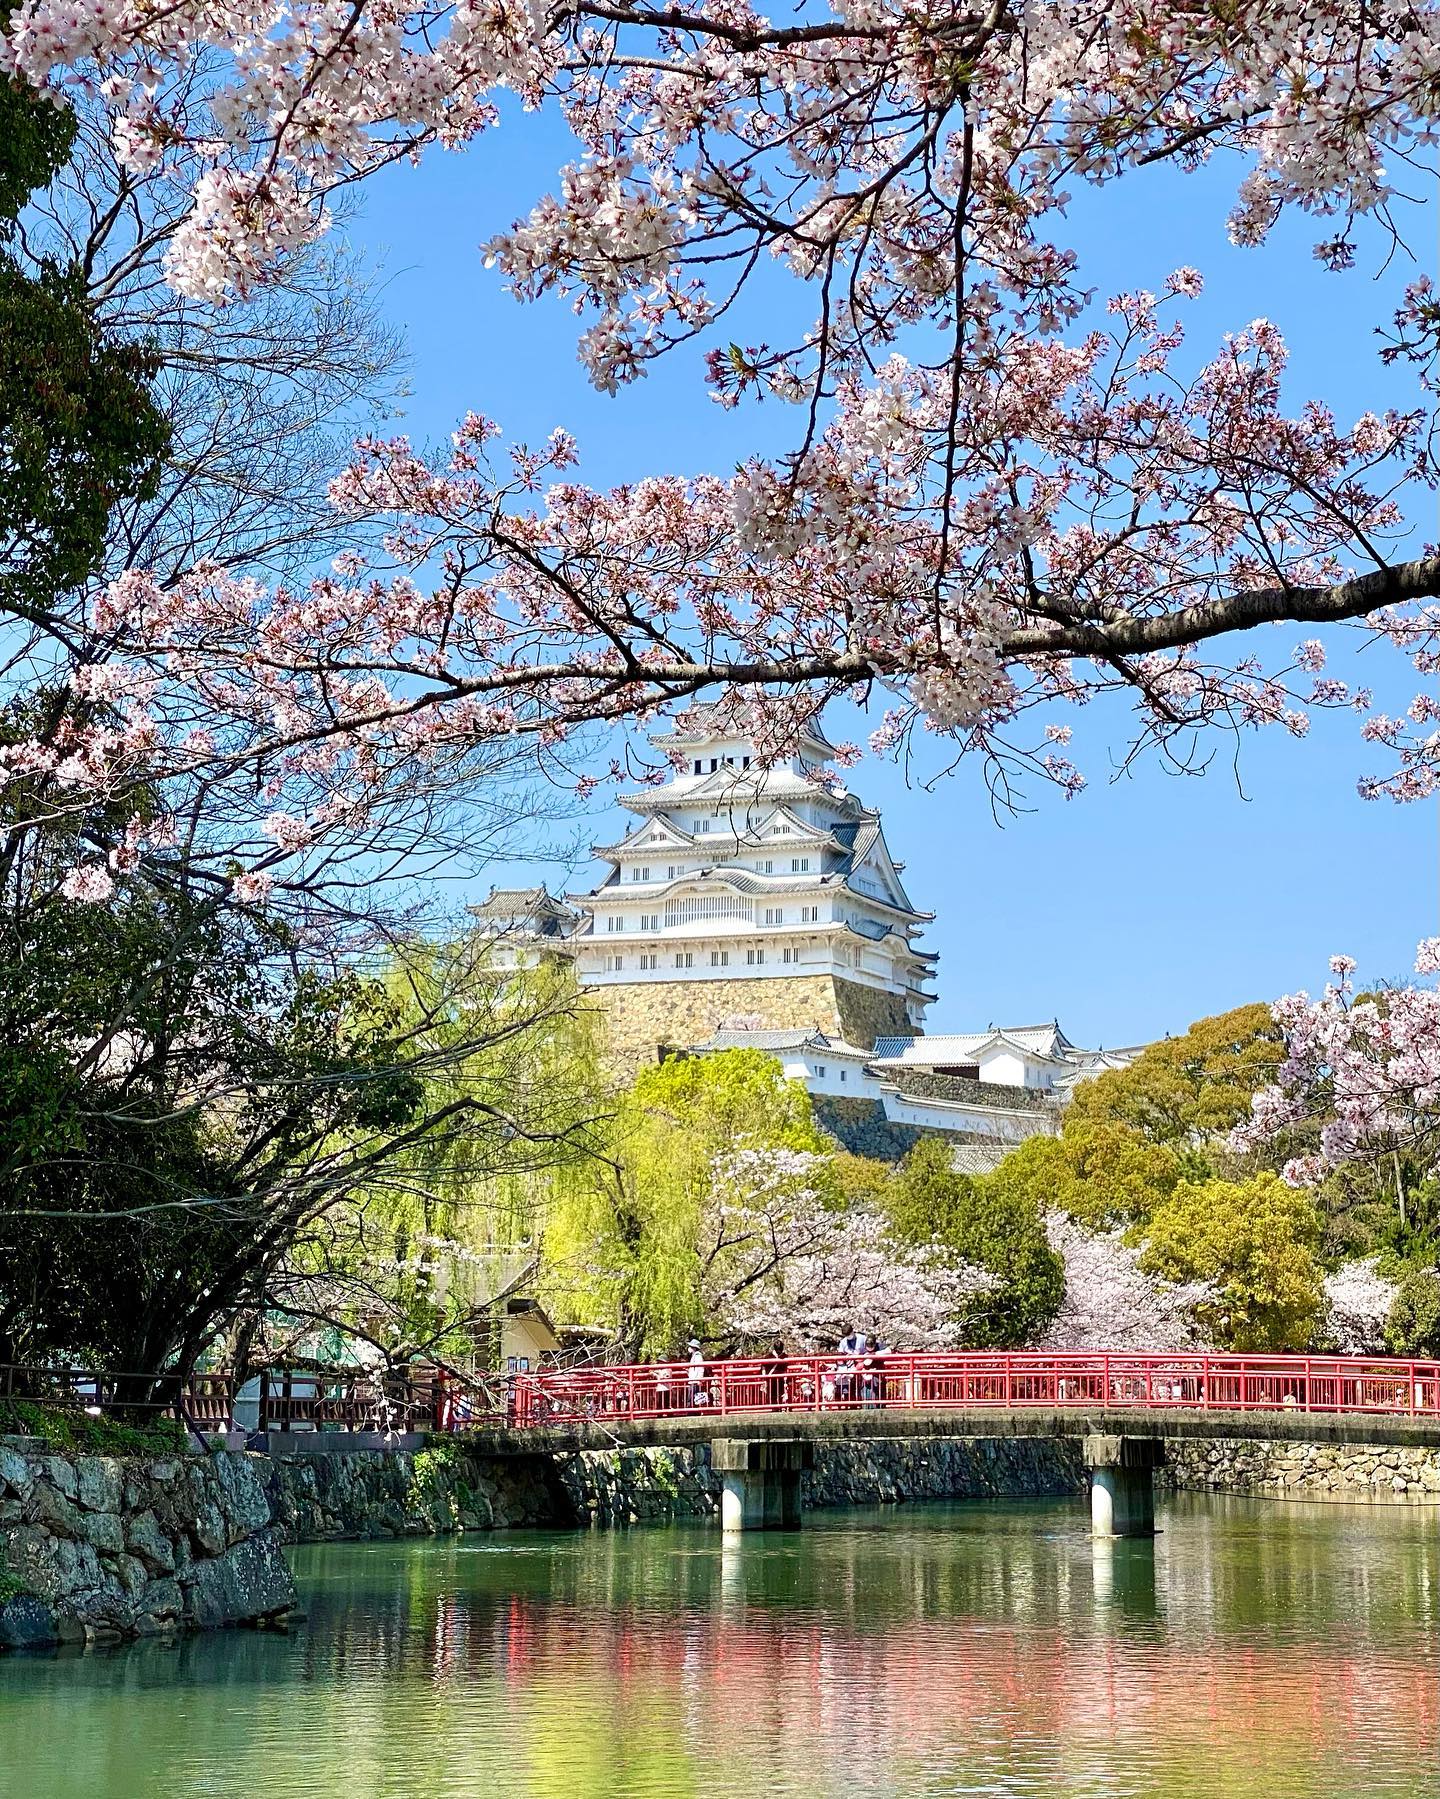 Cherry Blossoms in Japan - Himeji Castle